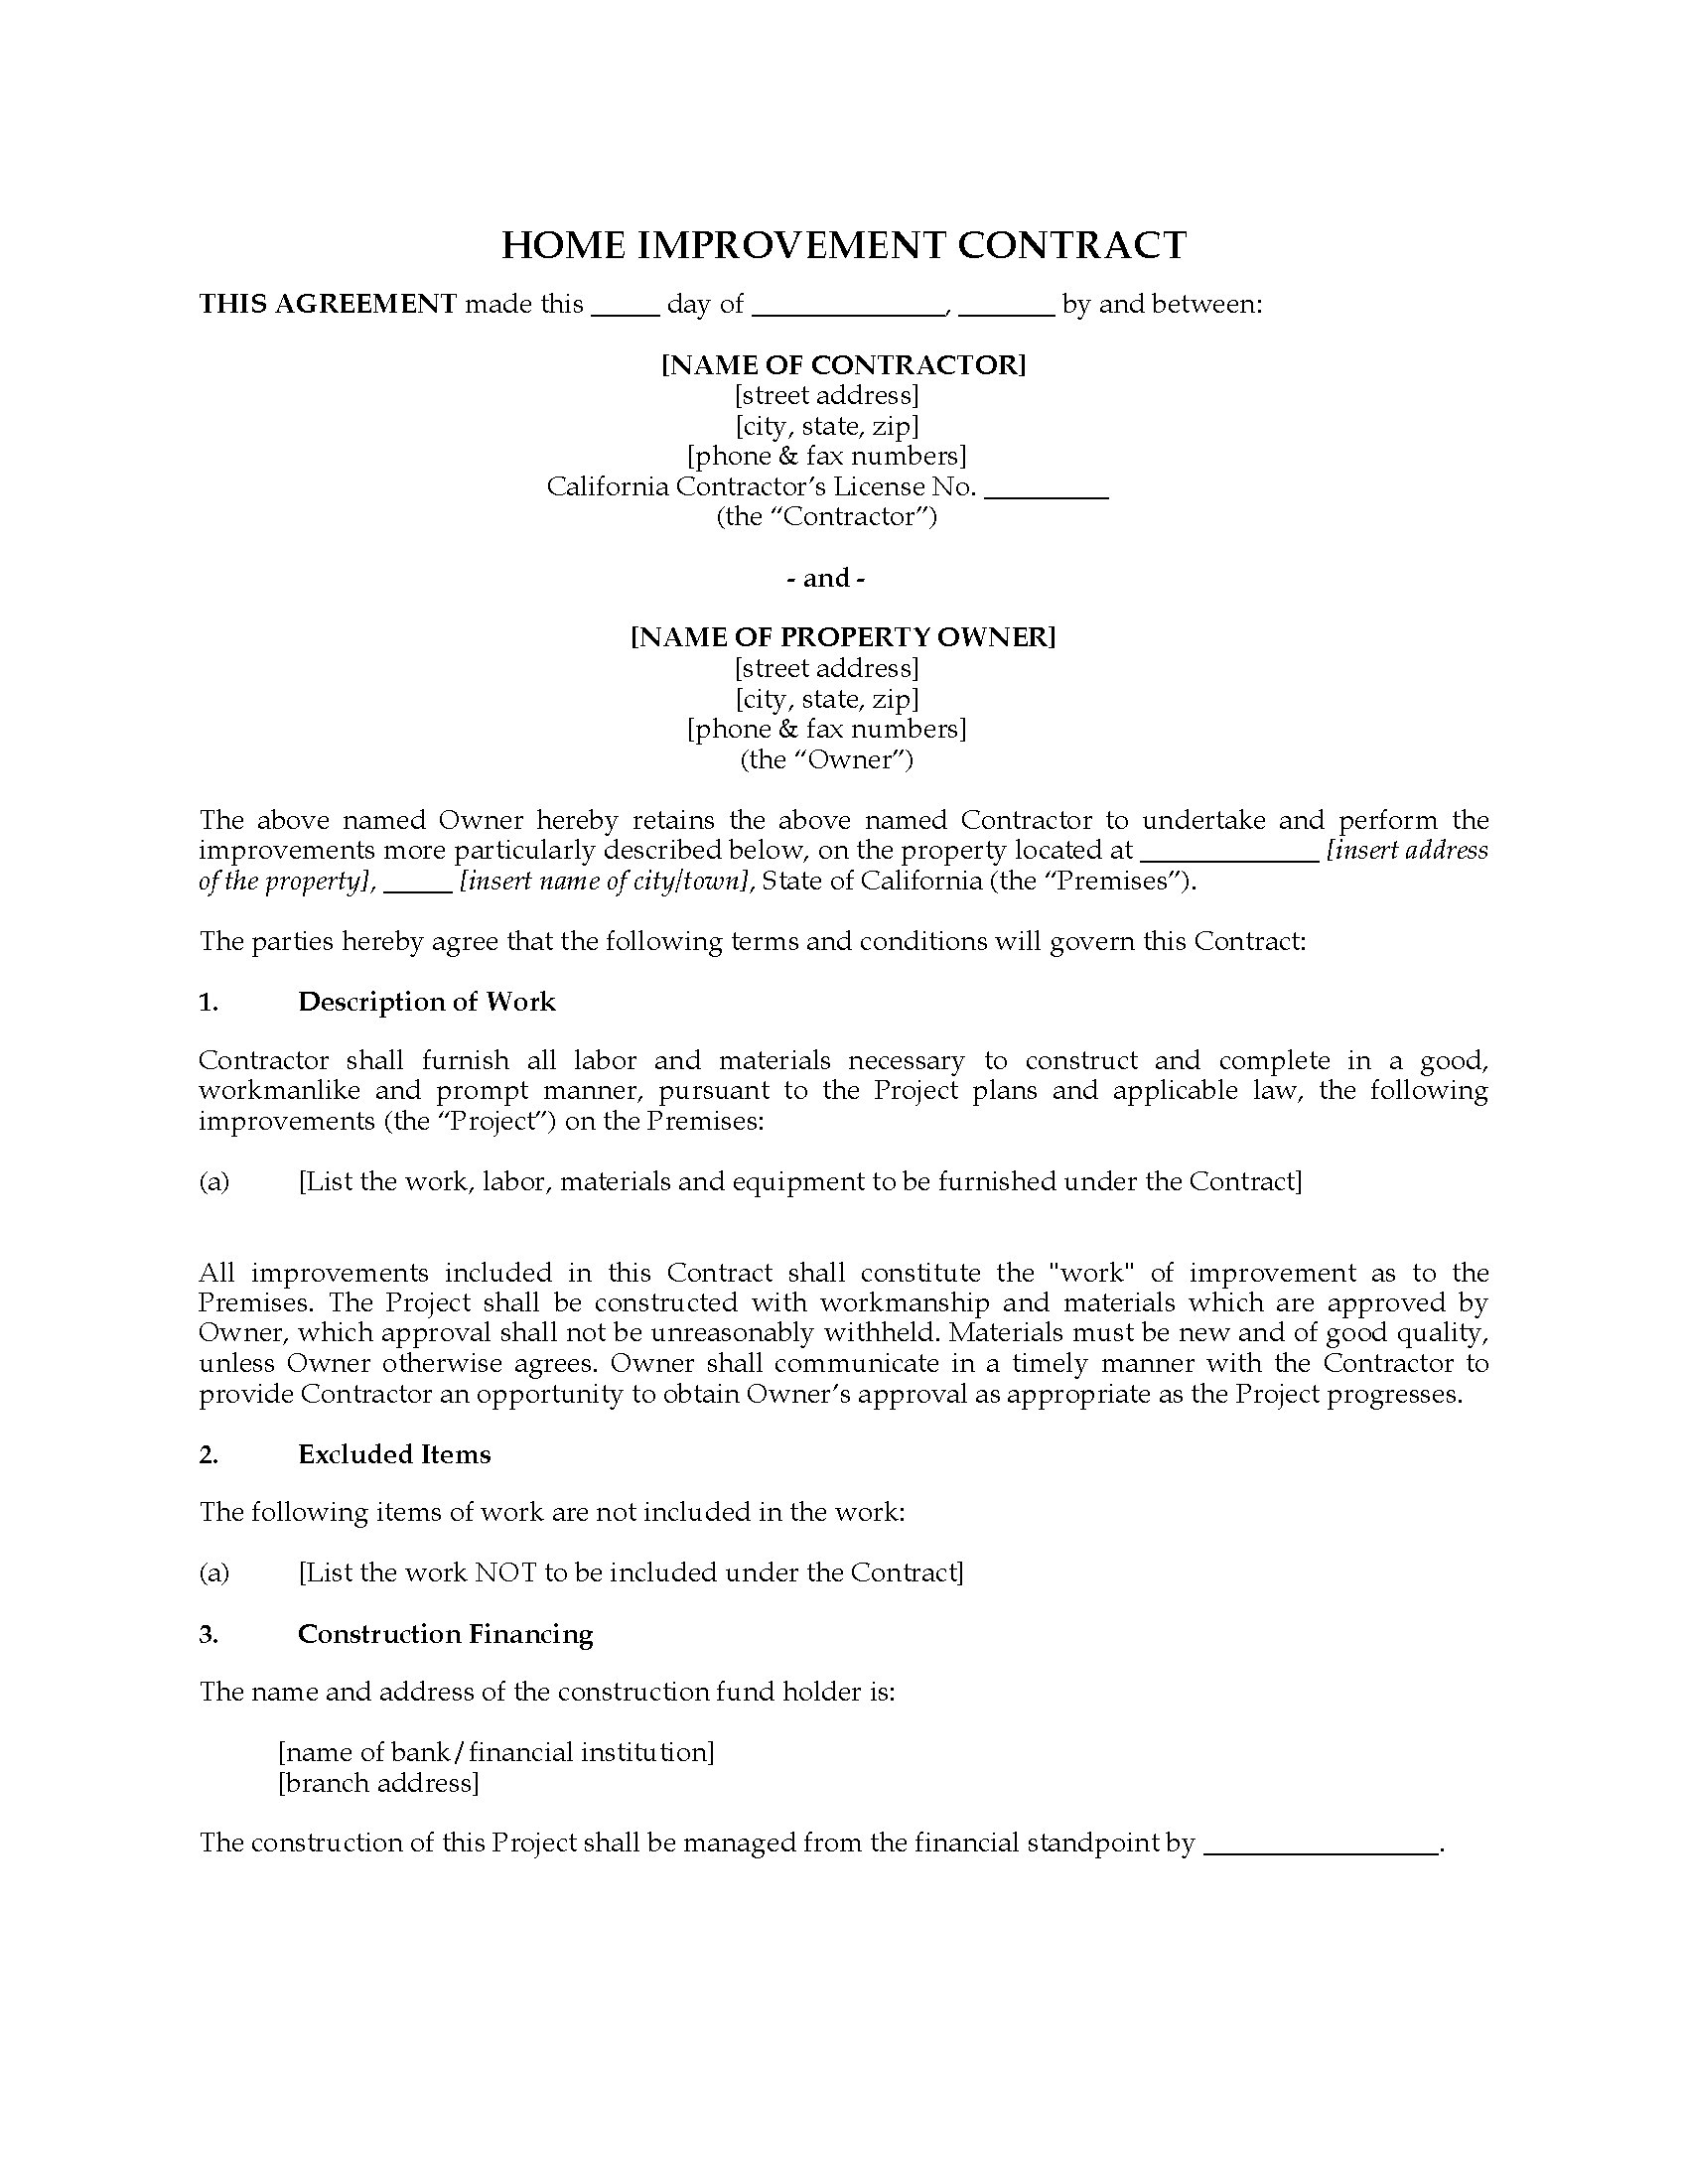 Maryland Construction Contract Template | Cover Letter Pertaining To Home Improvement Contract Template